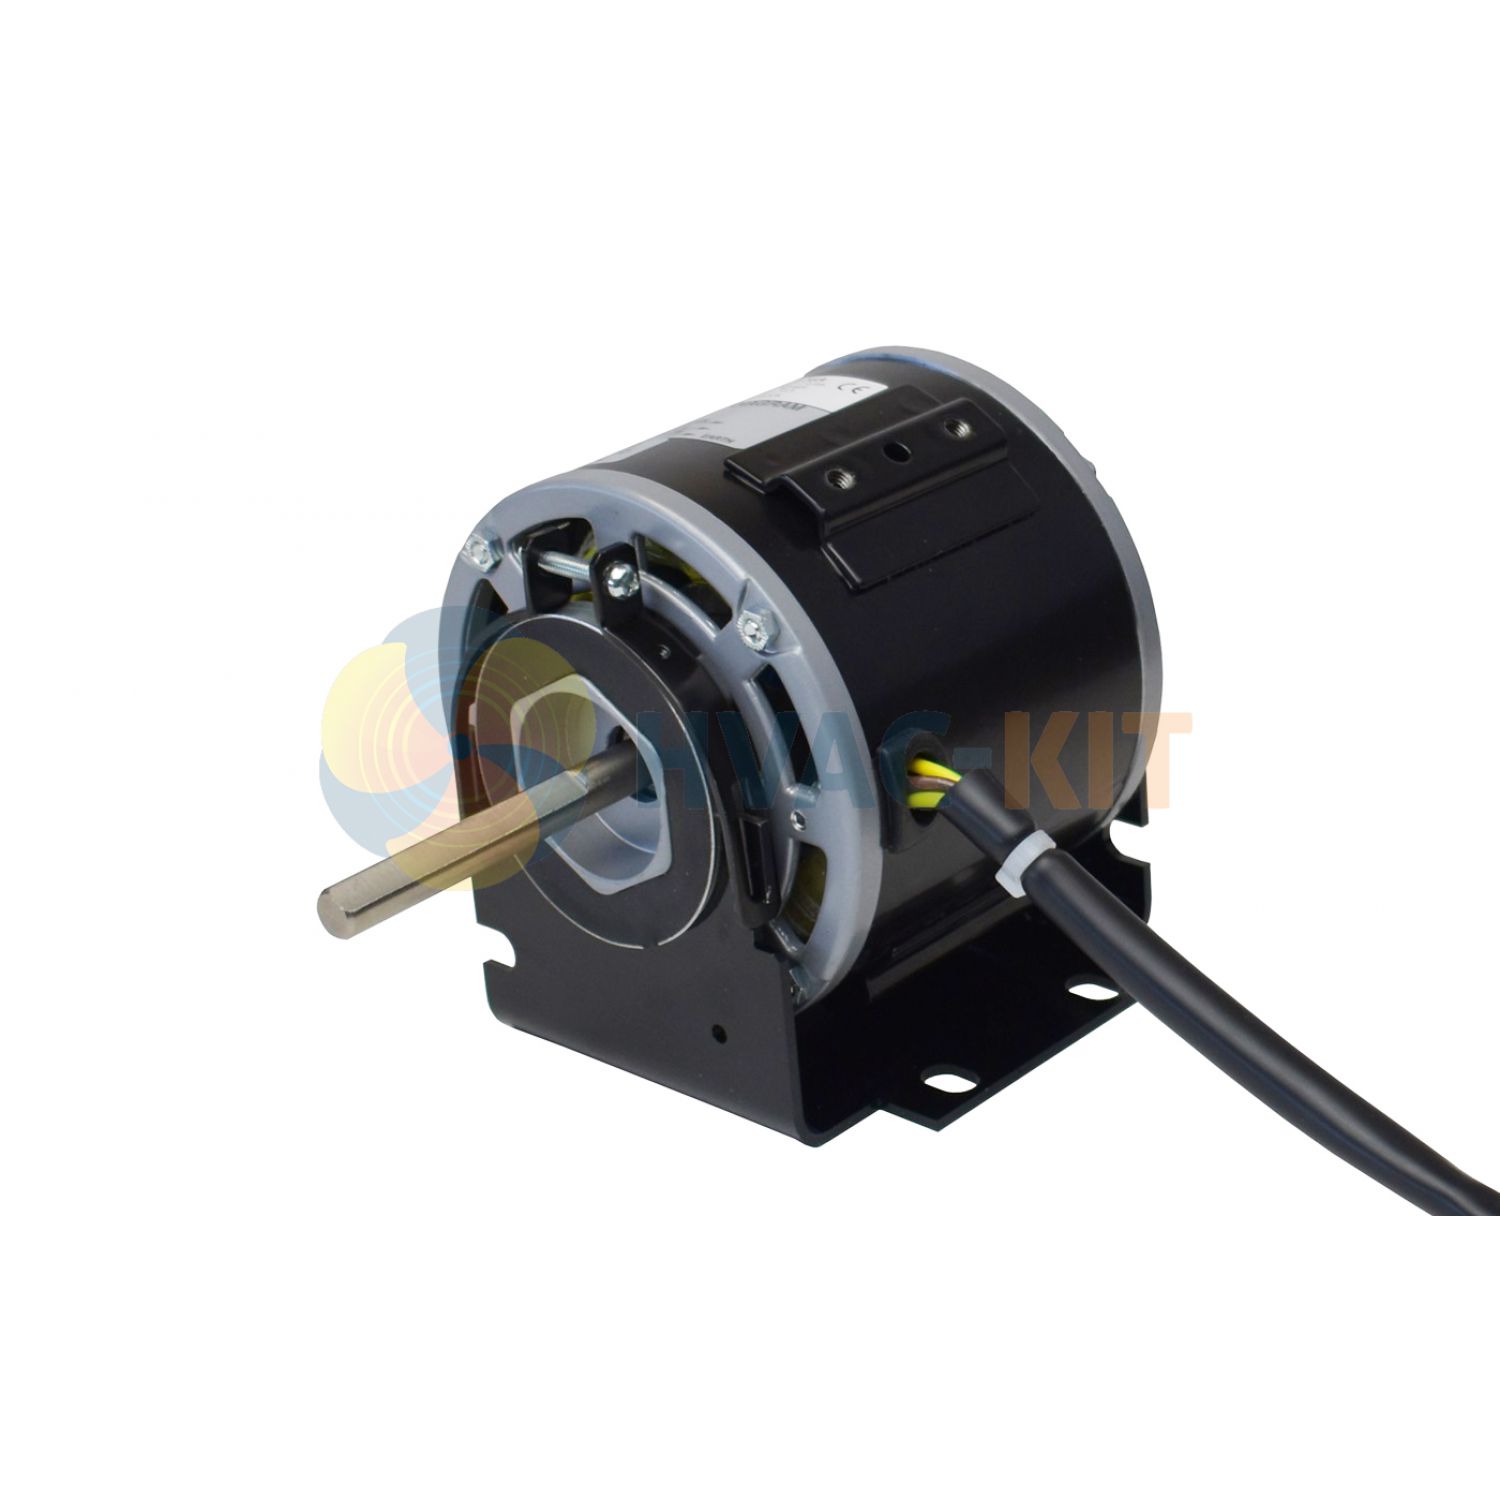 41-4-35A-RB_4 Resilient Base Mount Motor